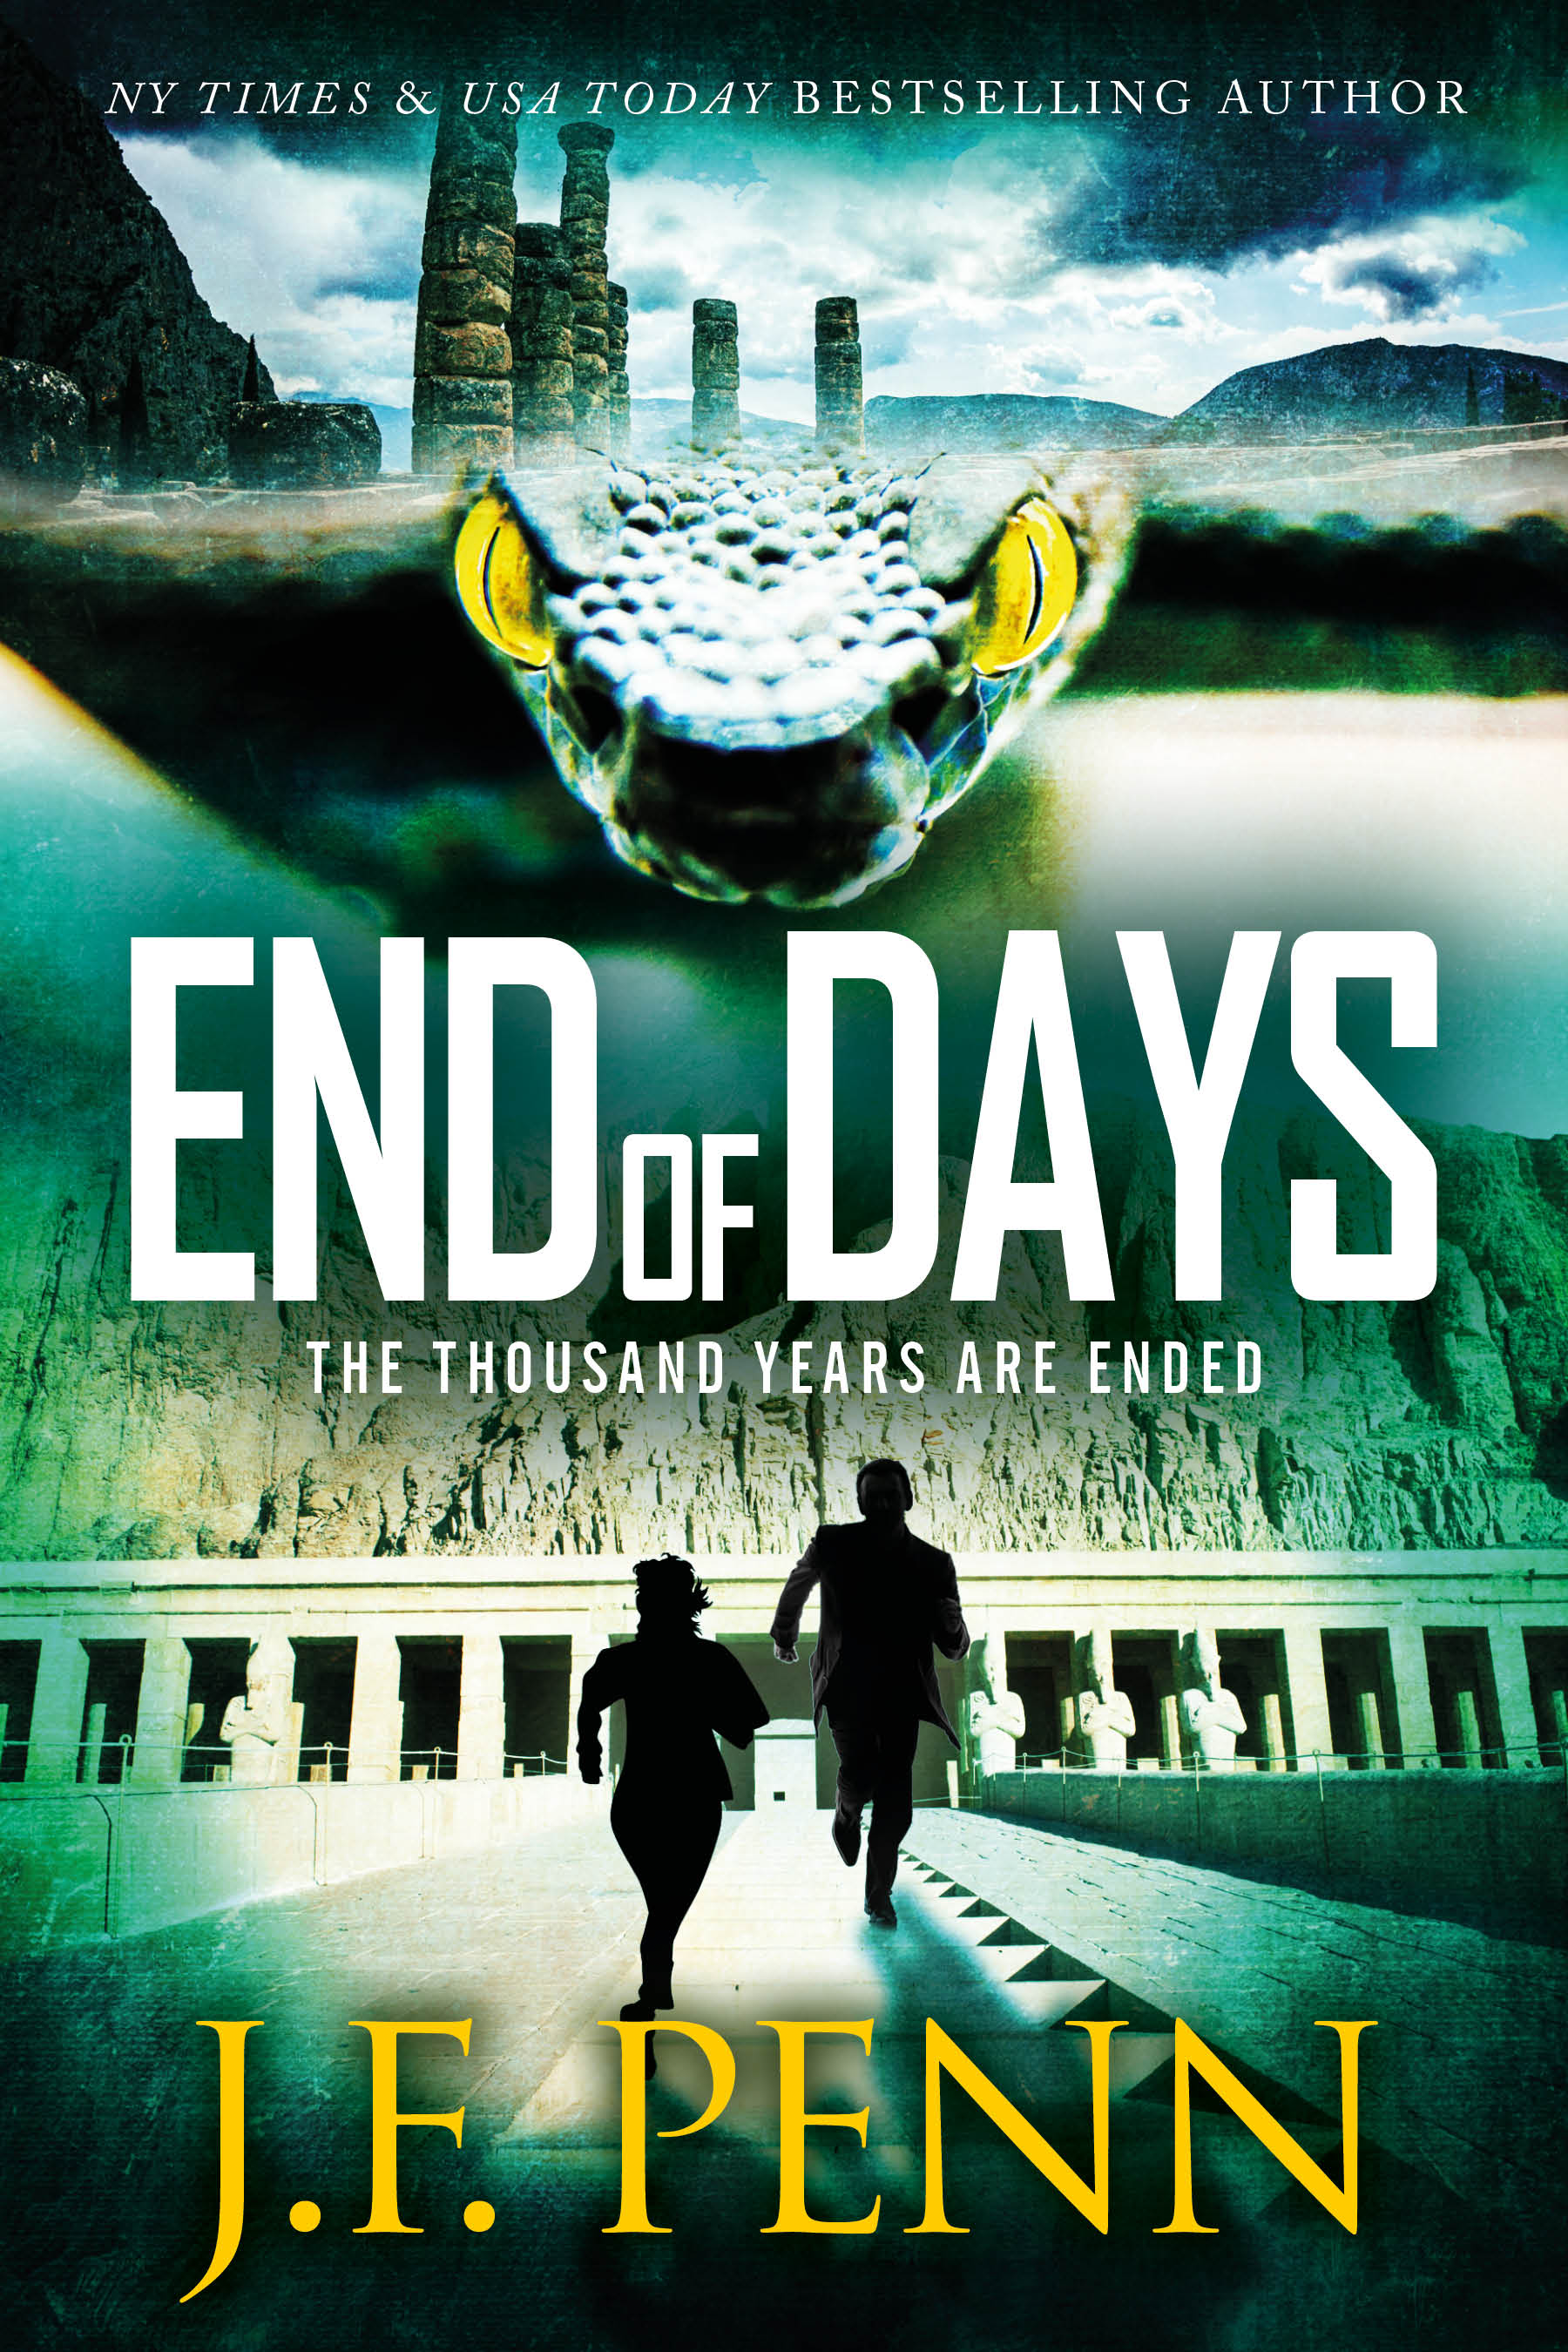 austin correia recommends end of days torrent pic